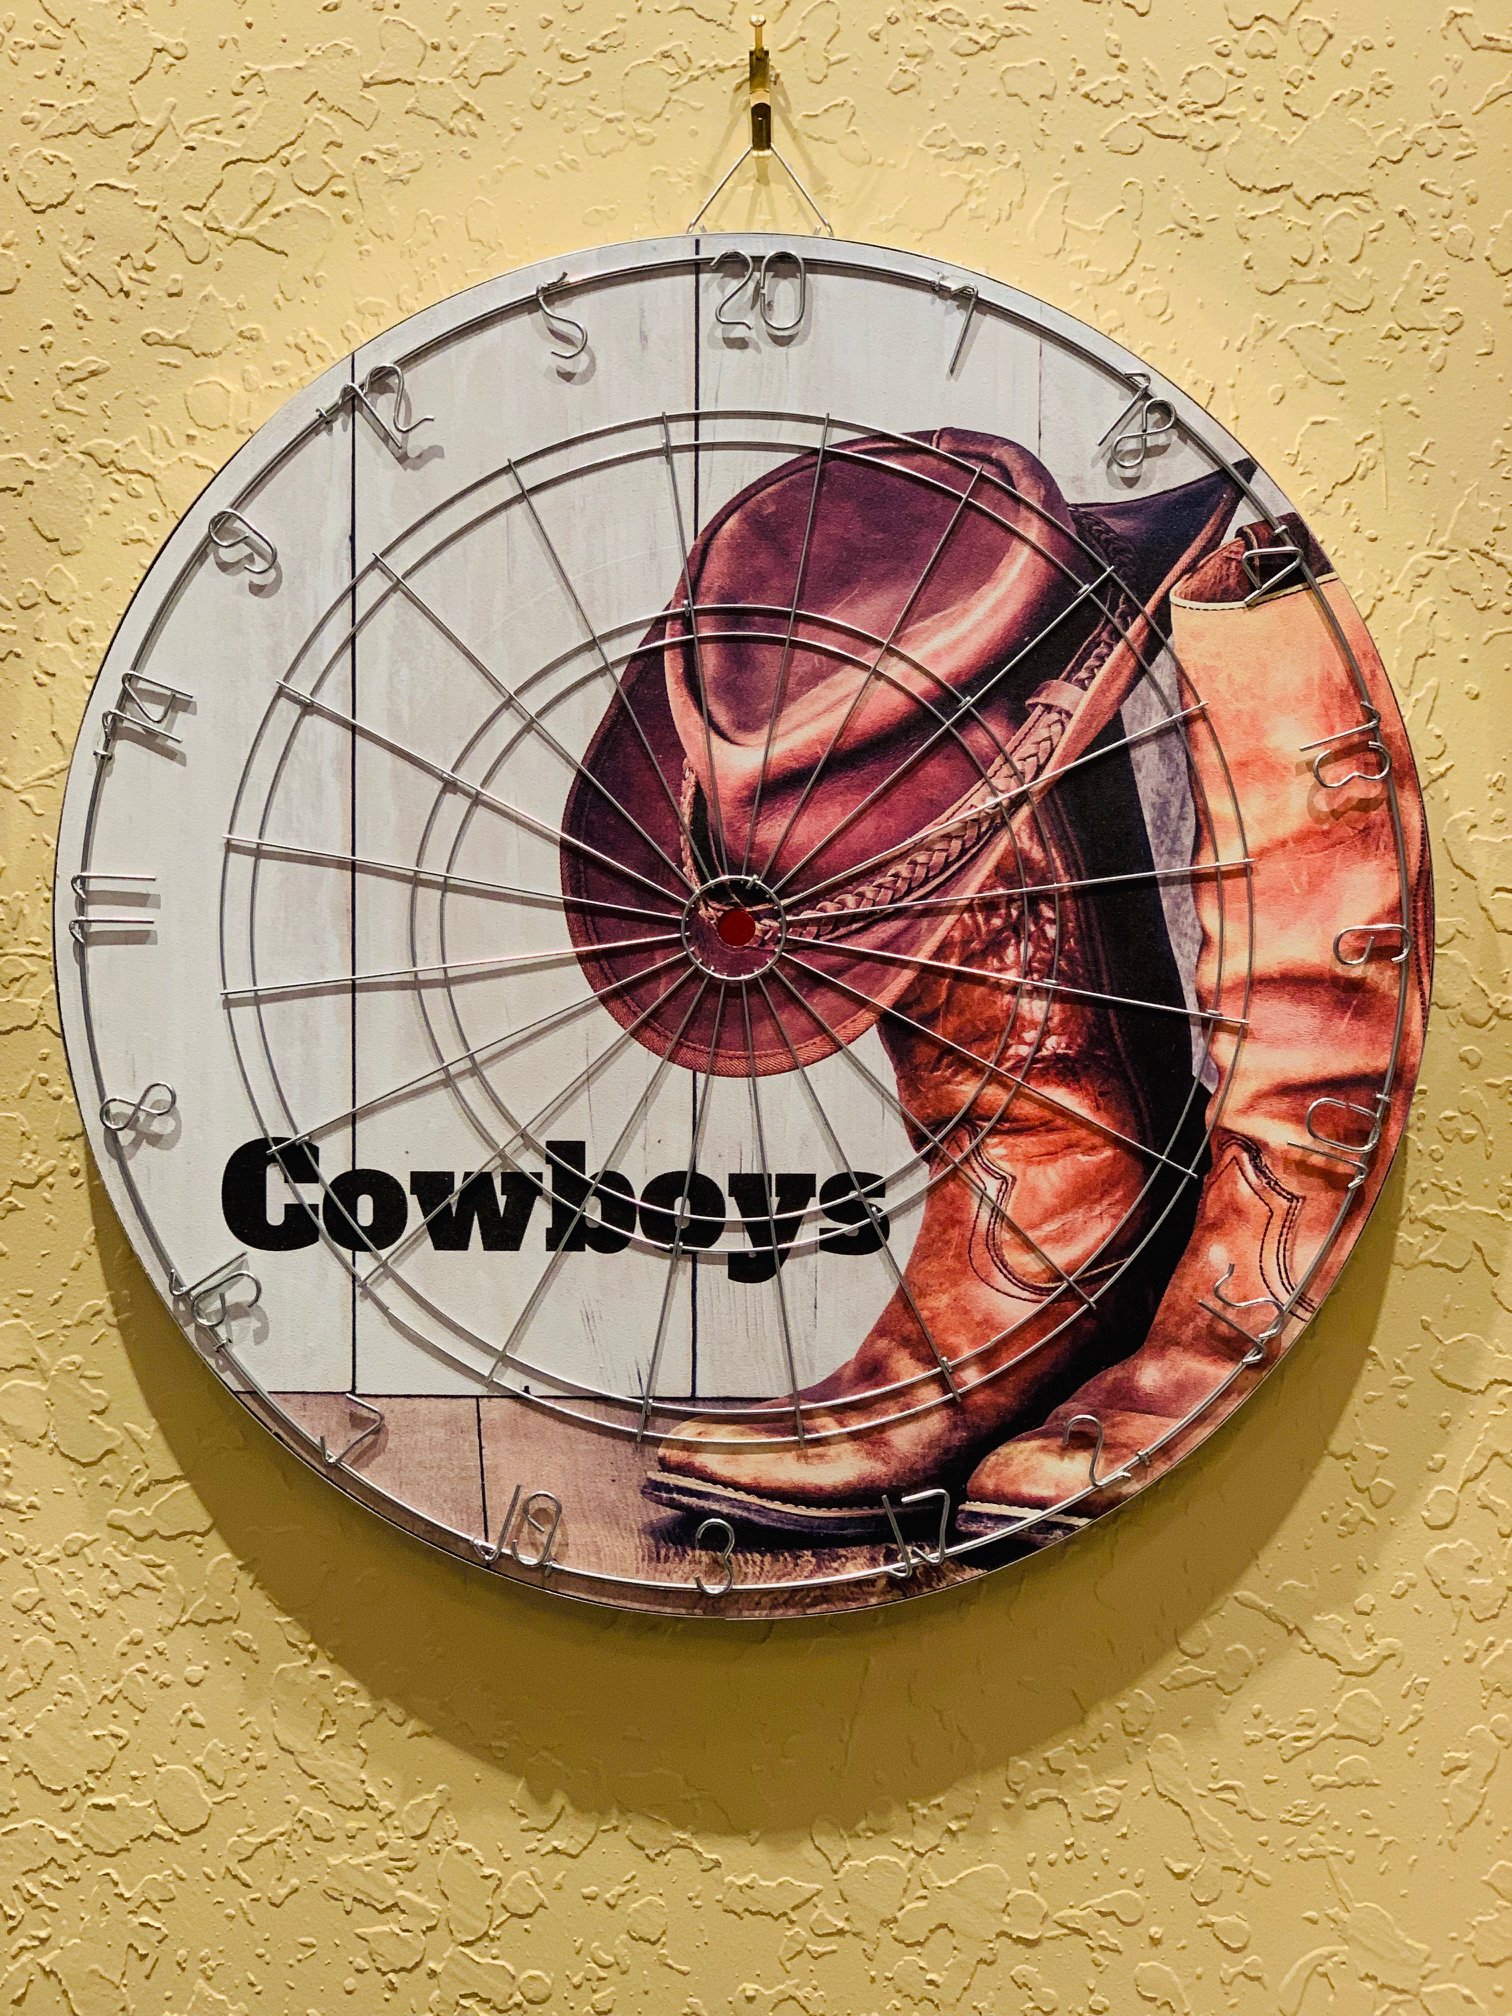 Photograph of dart board with cowboy boot hat